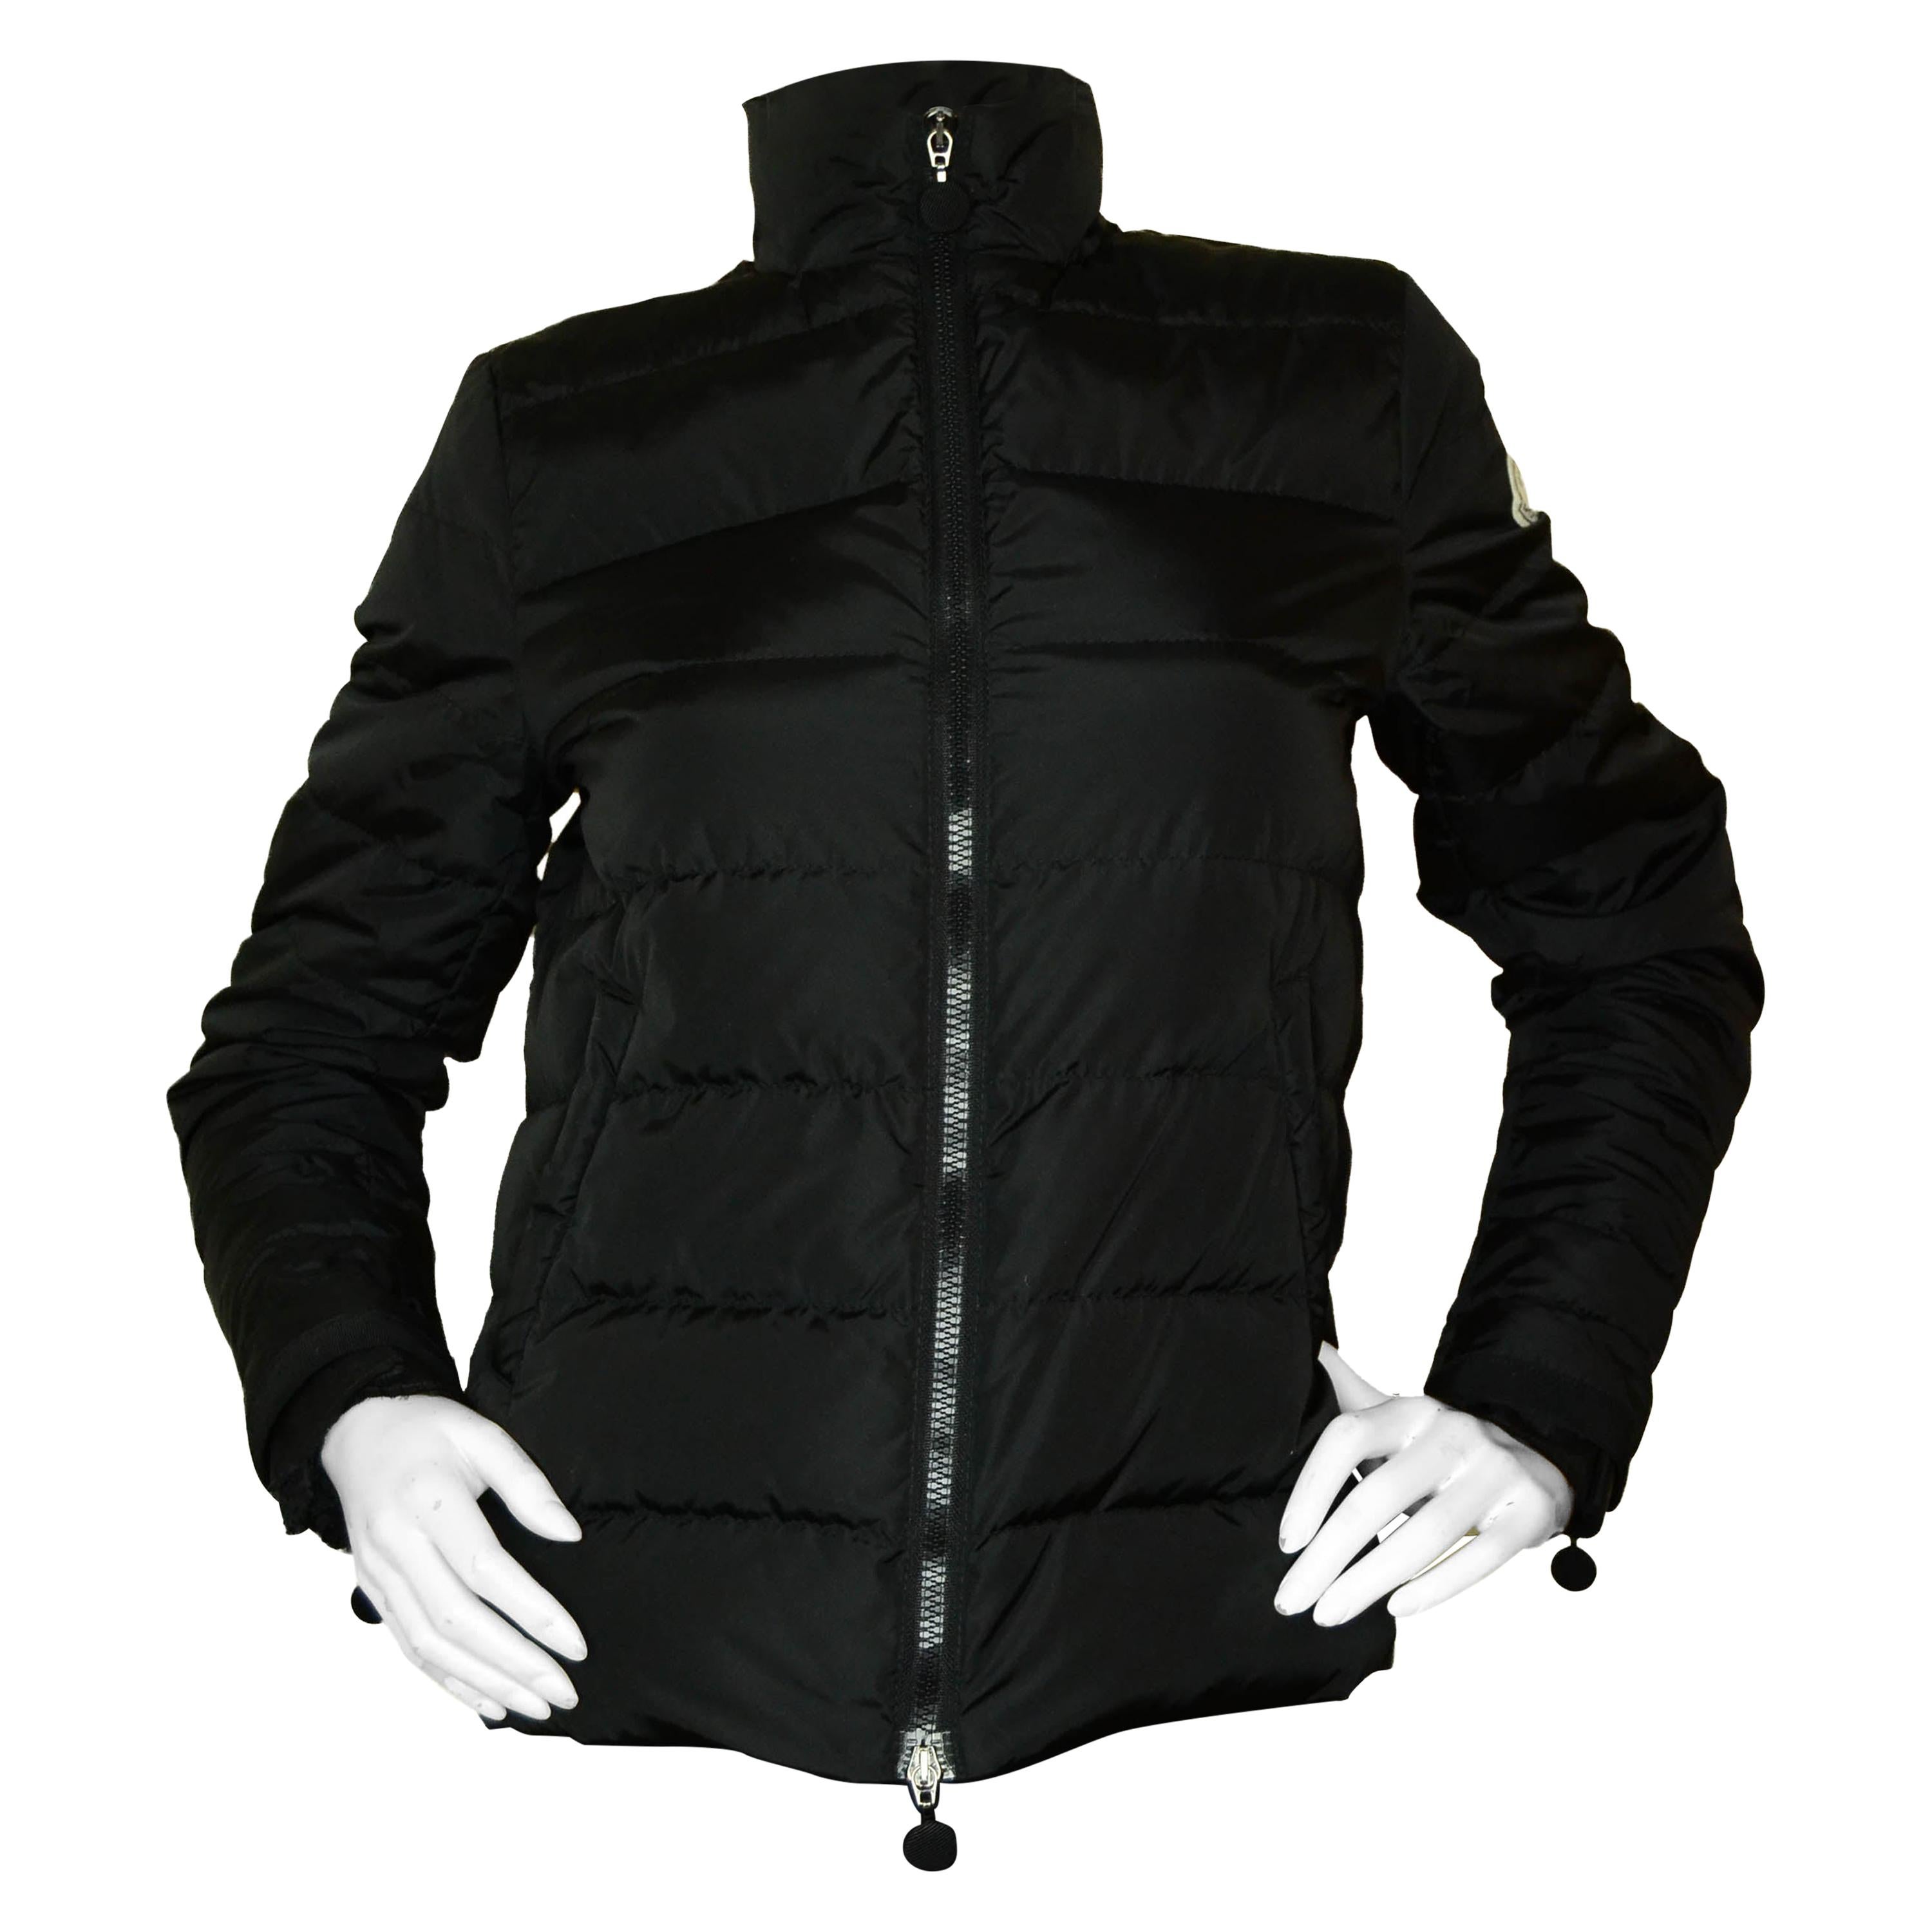 Moncler Black Serica Down Puffer Jacket

Made In: Romania
Color: Black
Materials: 99% Polyamide, 1% Polyamide
Lining:Polyester
Opening/Closure: 2-Way zipper
Overall Condition: Excellent

Tag Size: Designer 2/US M * Runs small. Please refer to